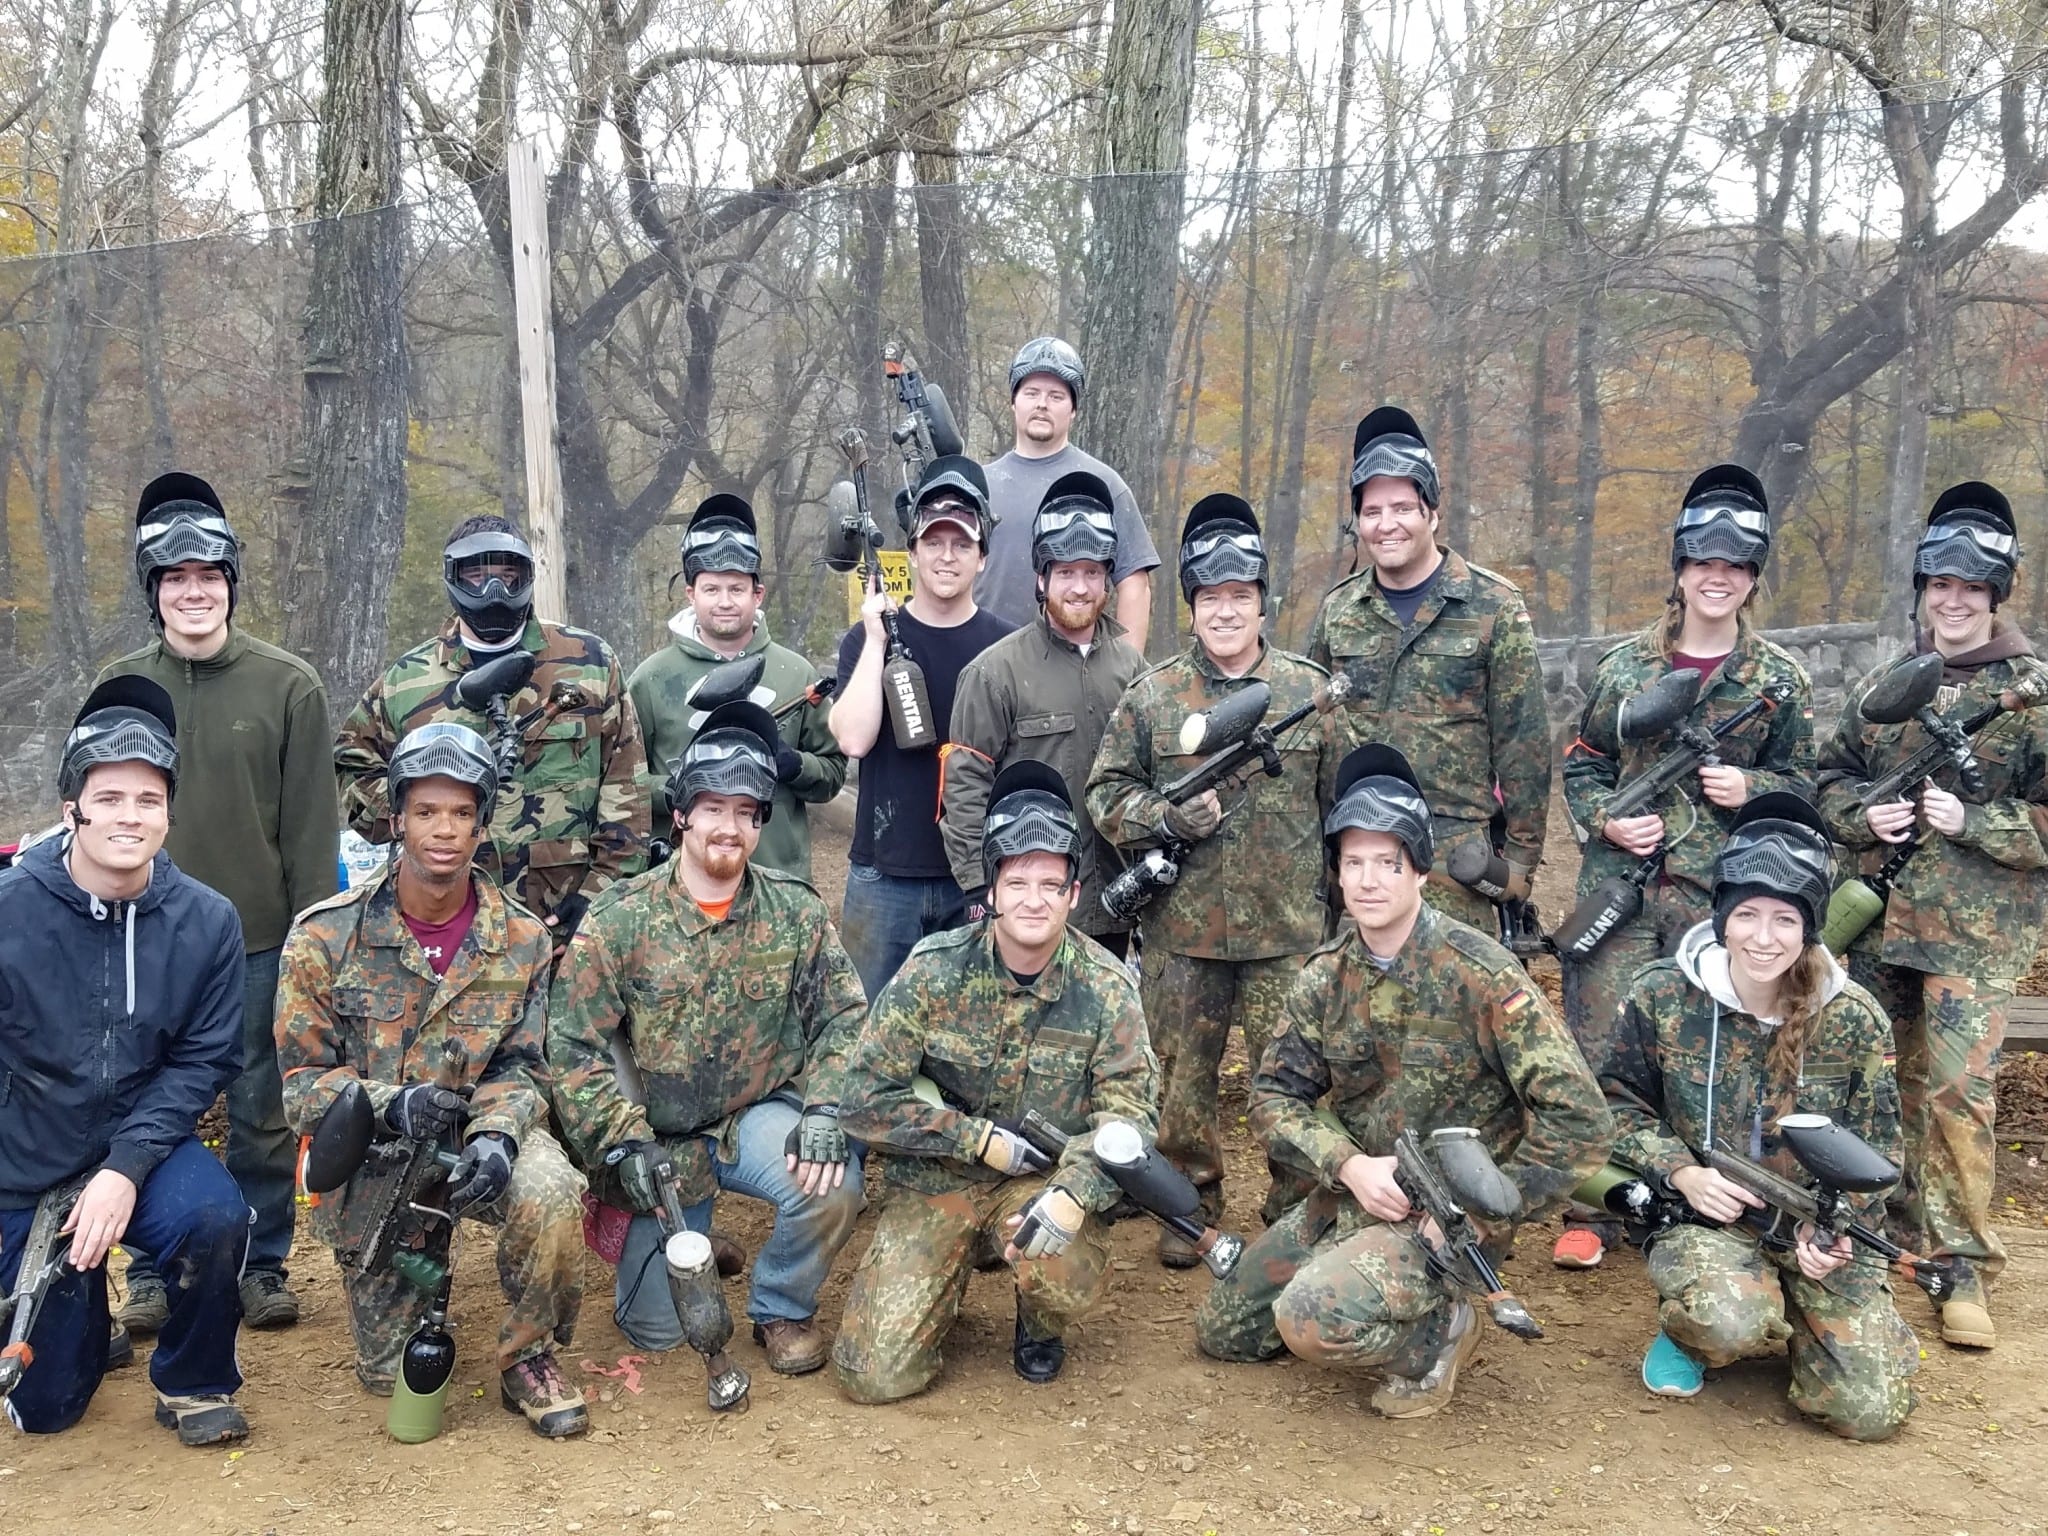 Paintball at Hogback Mountain